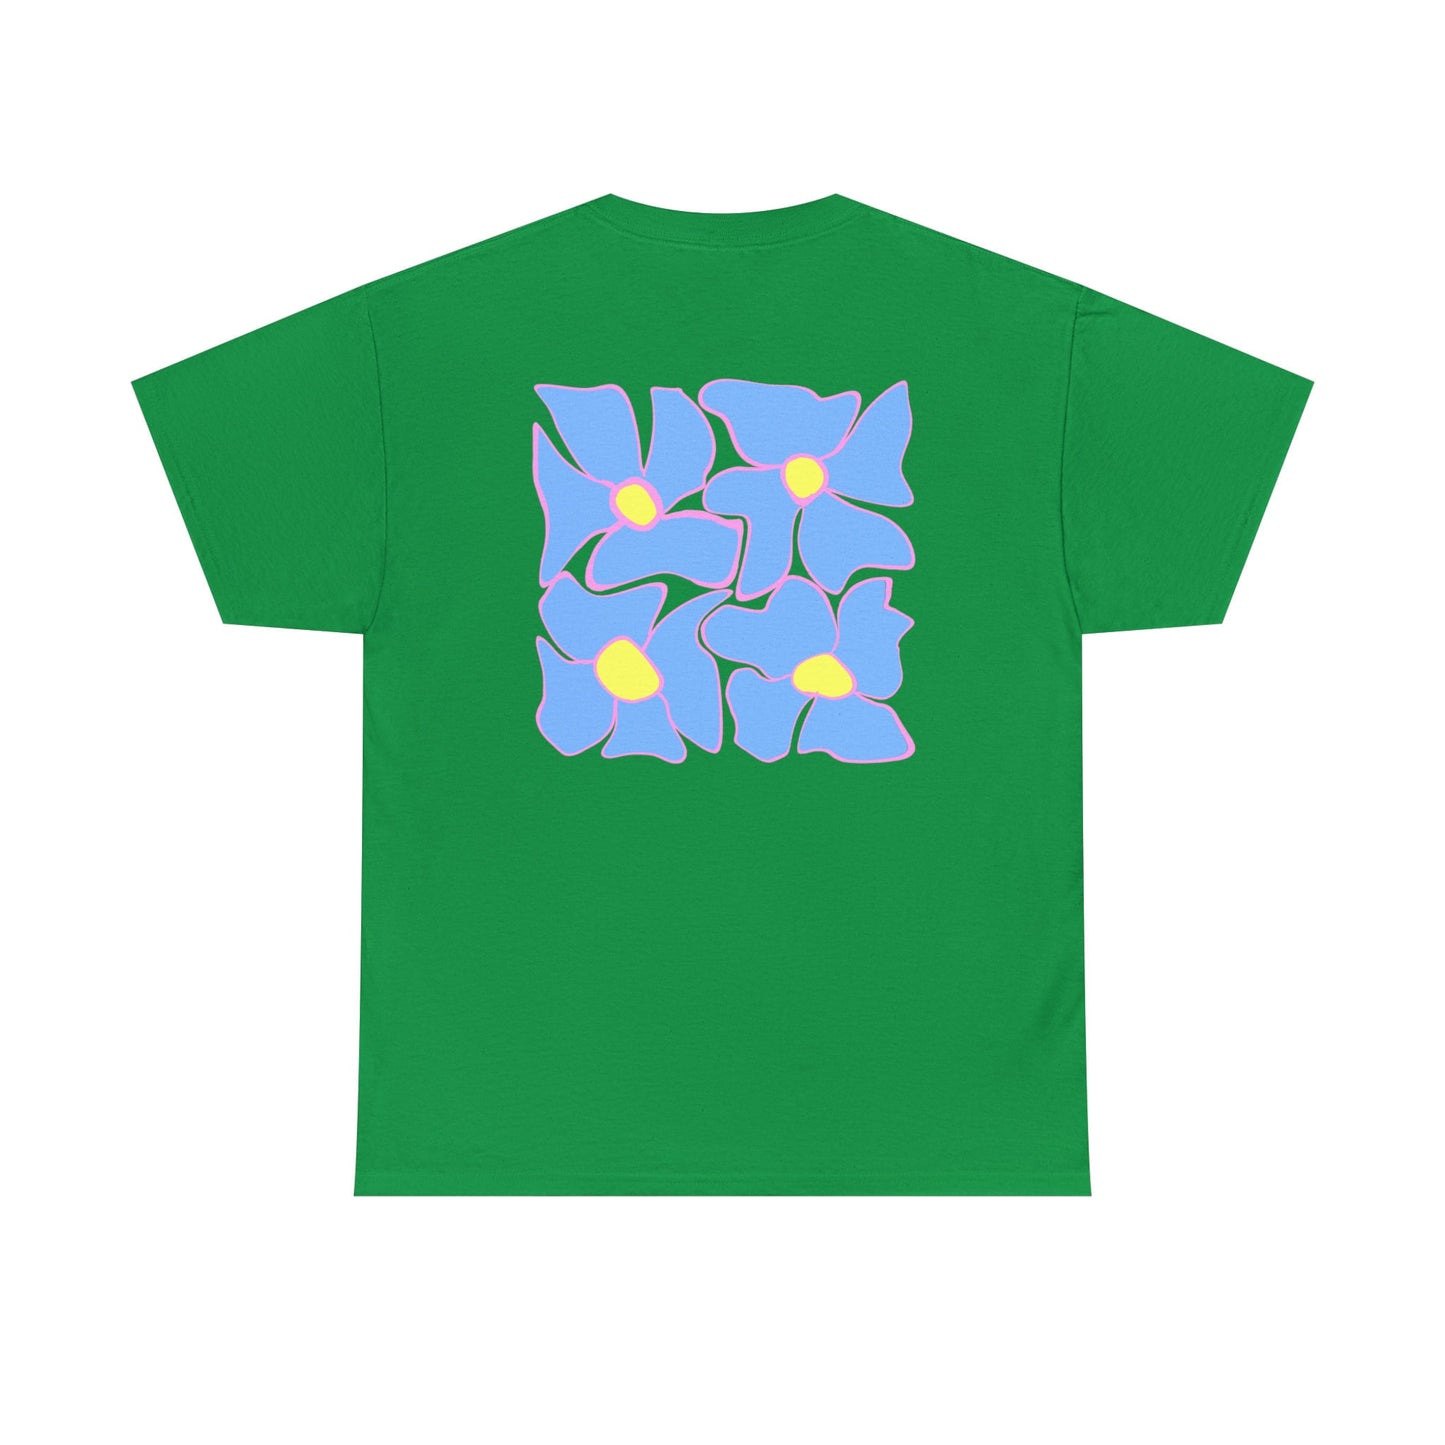 flowerz tee (design is on the back)